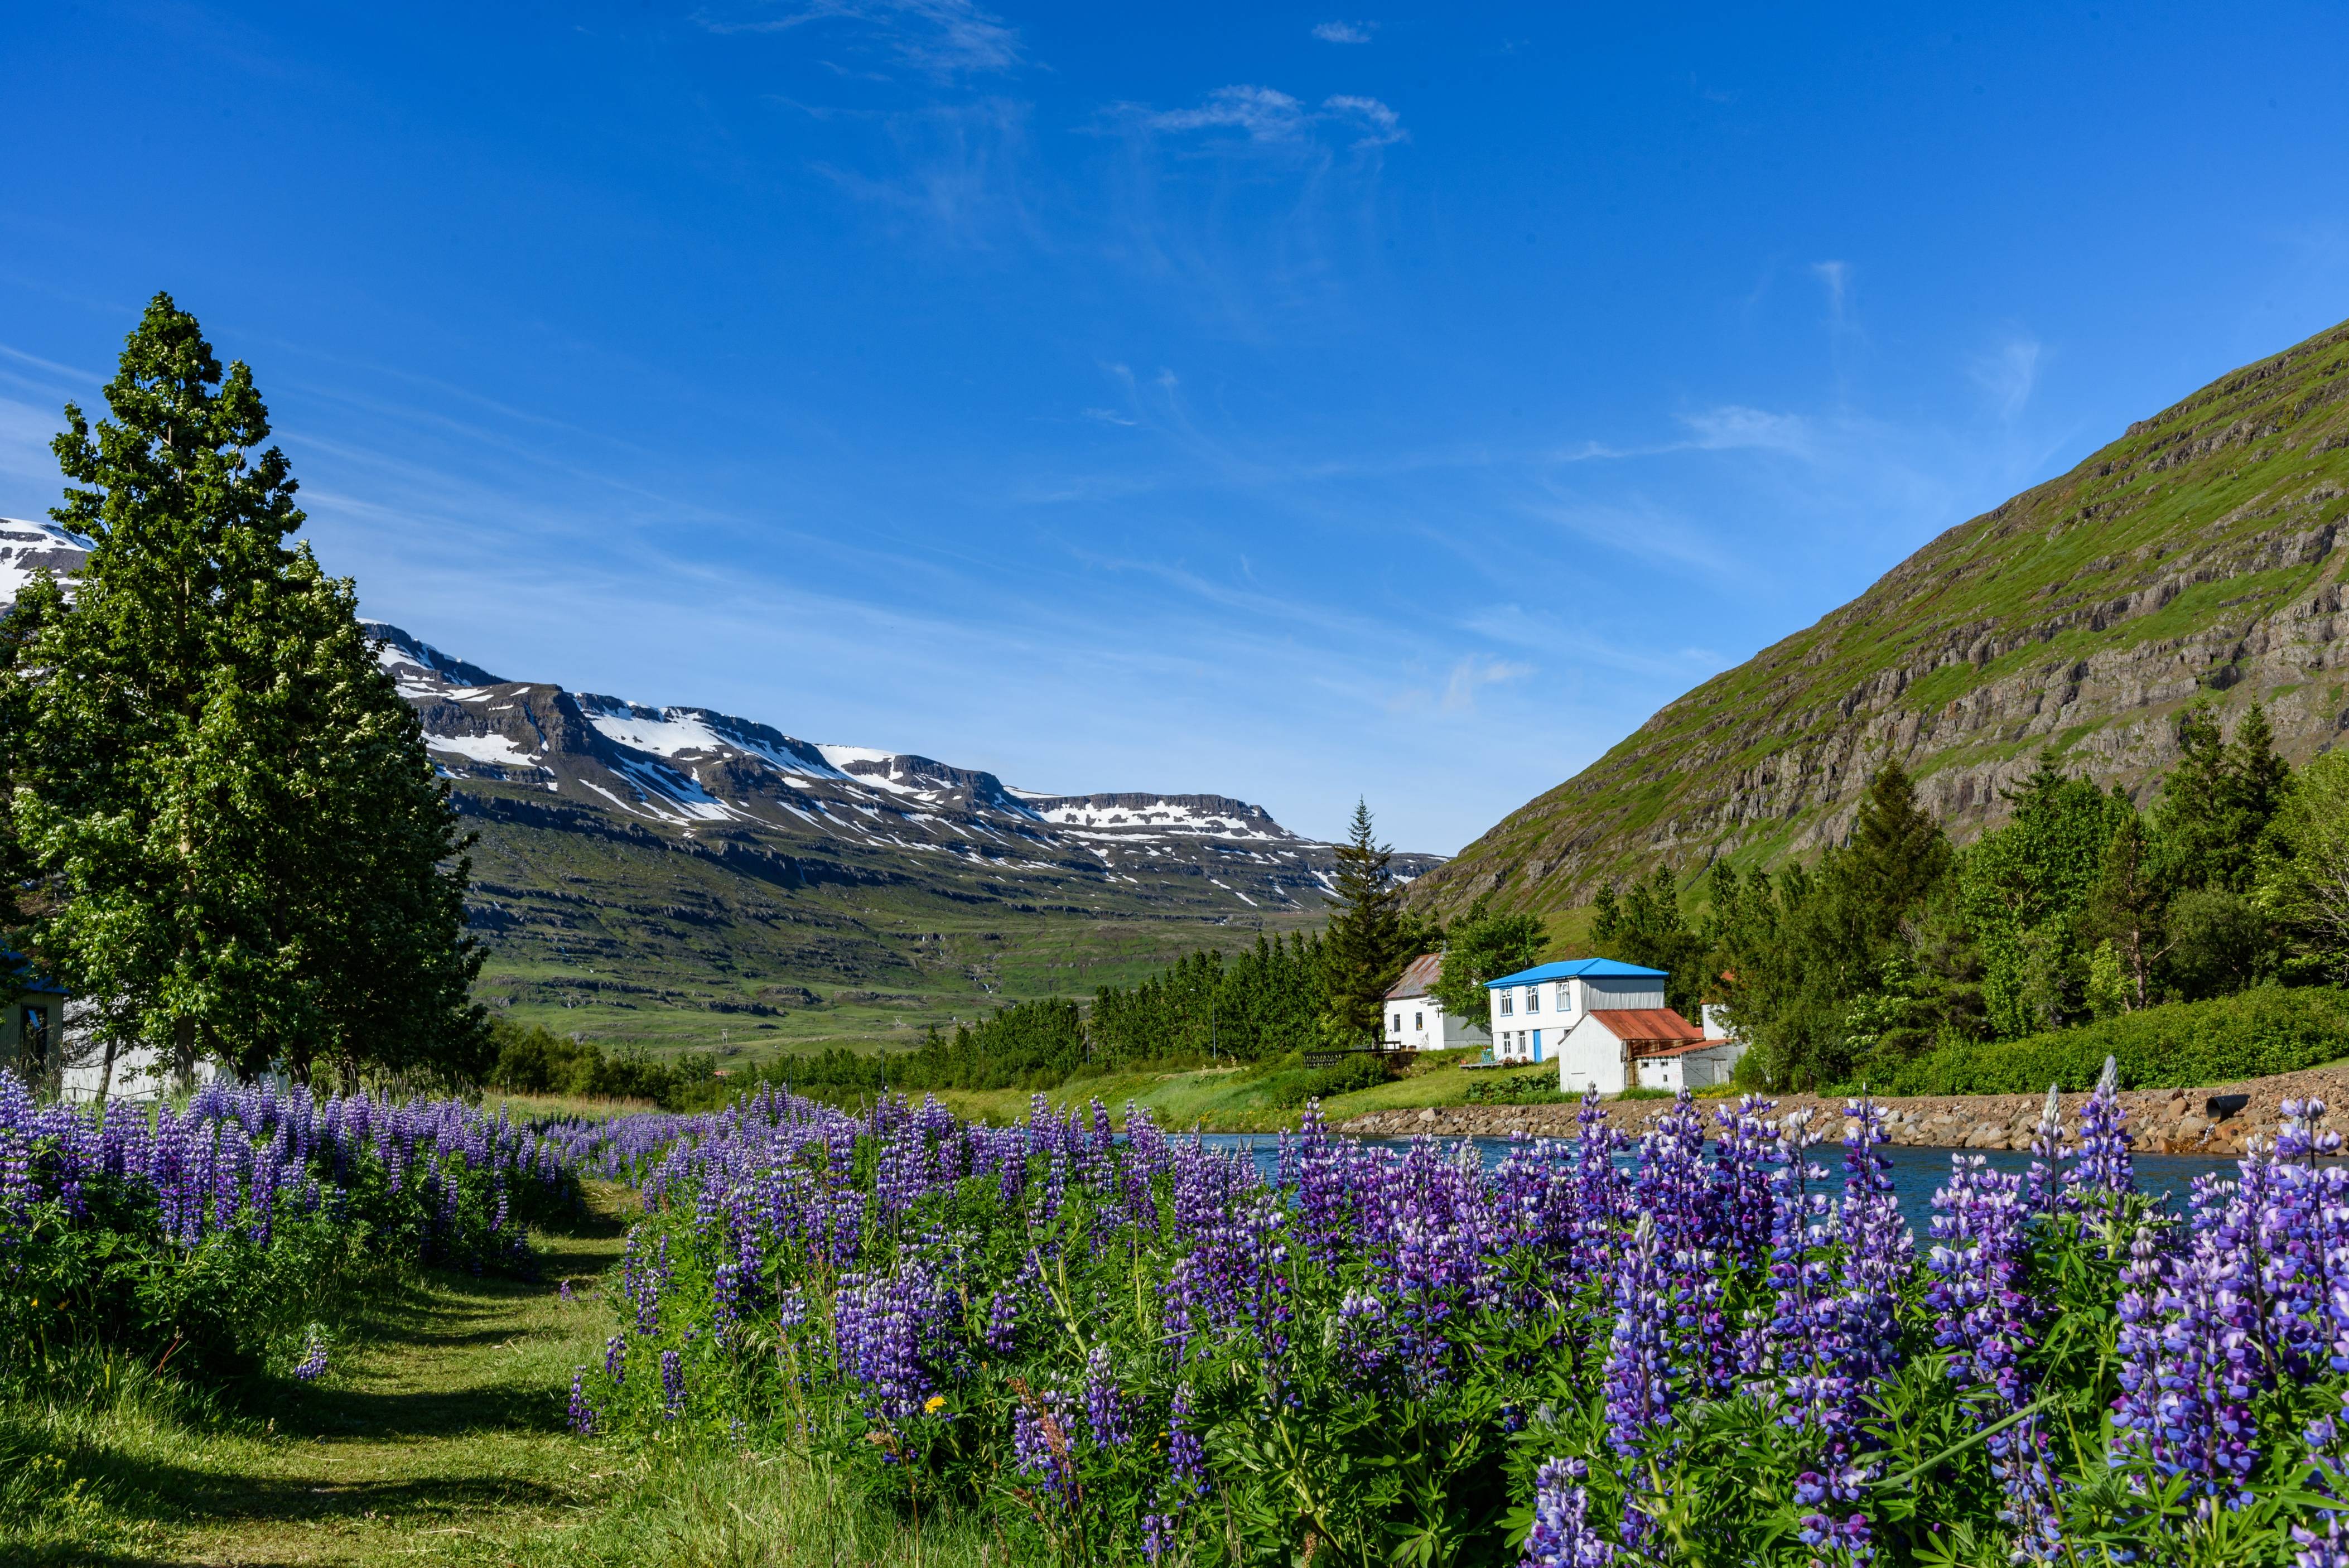 valley-in-iceland-on-a-sunny-day-tall-and-small-trees-and-lupines-with-three-colourful-houses-in-background-standing-by-a-river